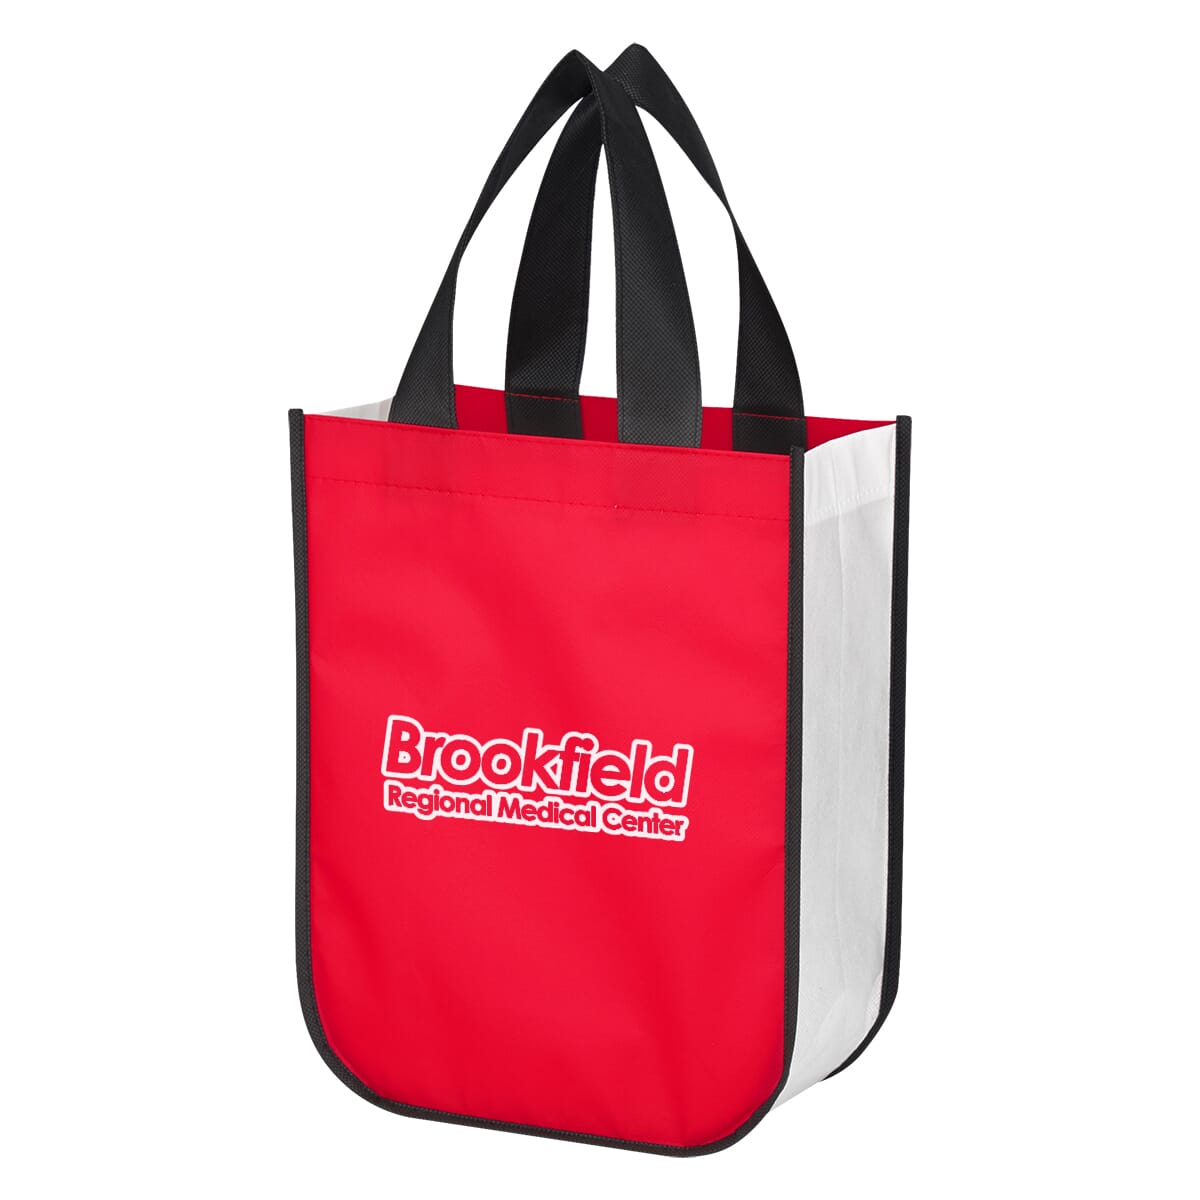 Promotional Branded Tote Bags & Custom Canvas Tote Bags | Crestline